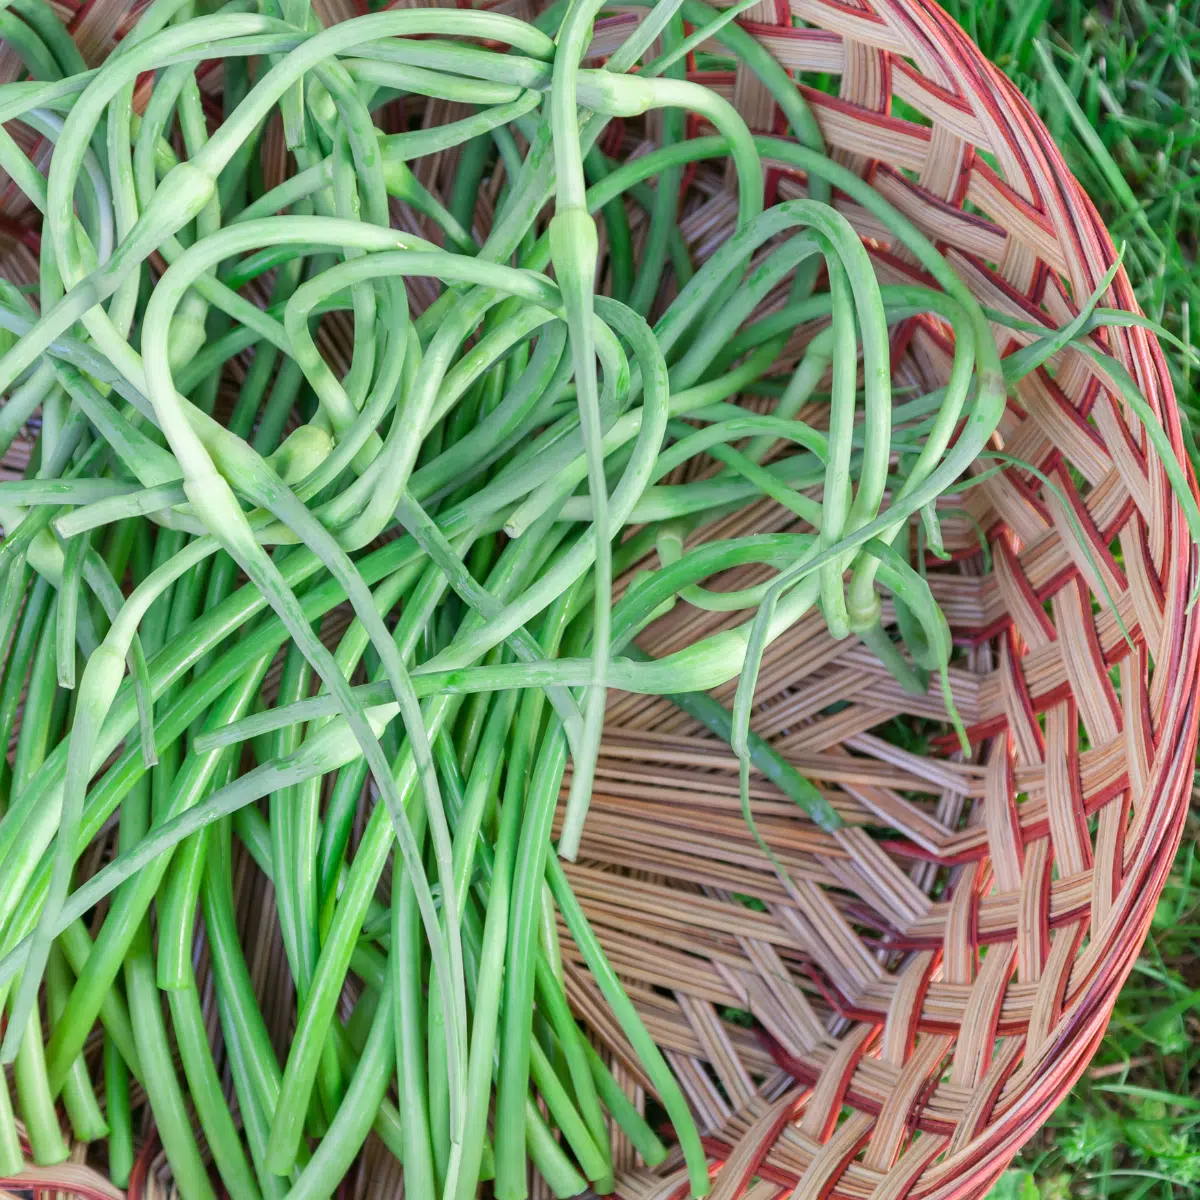 How to Harvest Garlic Scapes